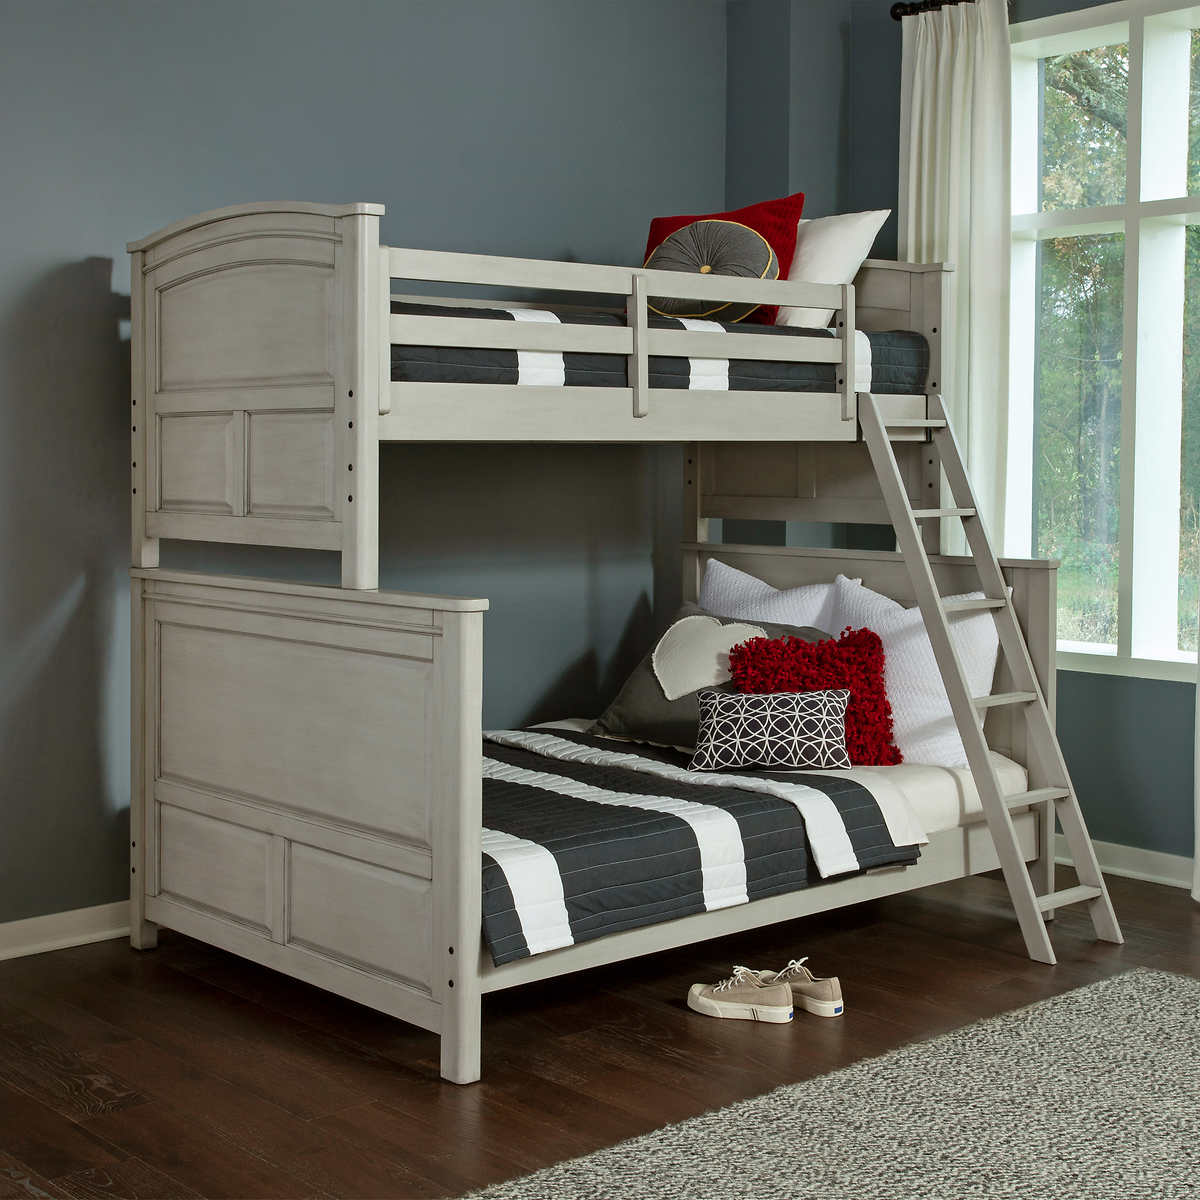 Wingate Twin Over Full Bunk Bed Costco, How Much Weight Can A Full Size Bunk Bed Hold